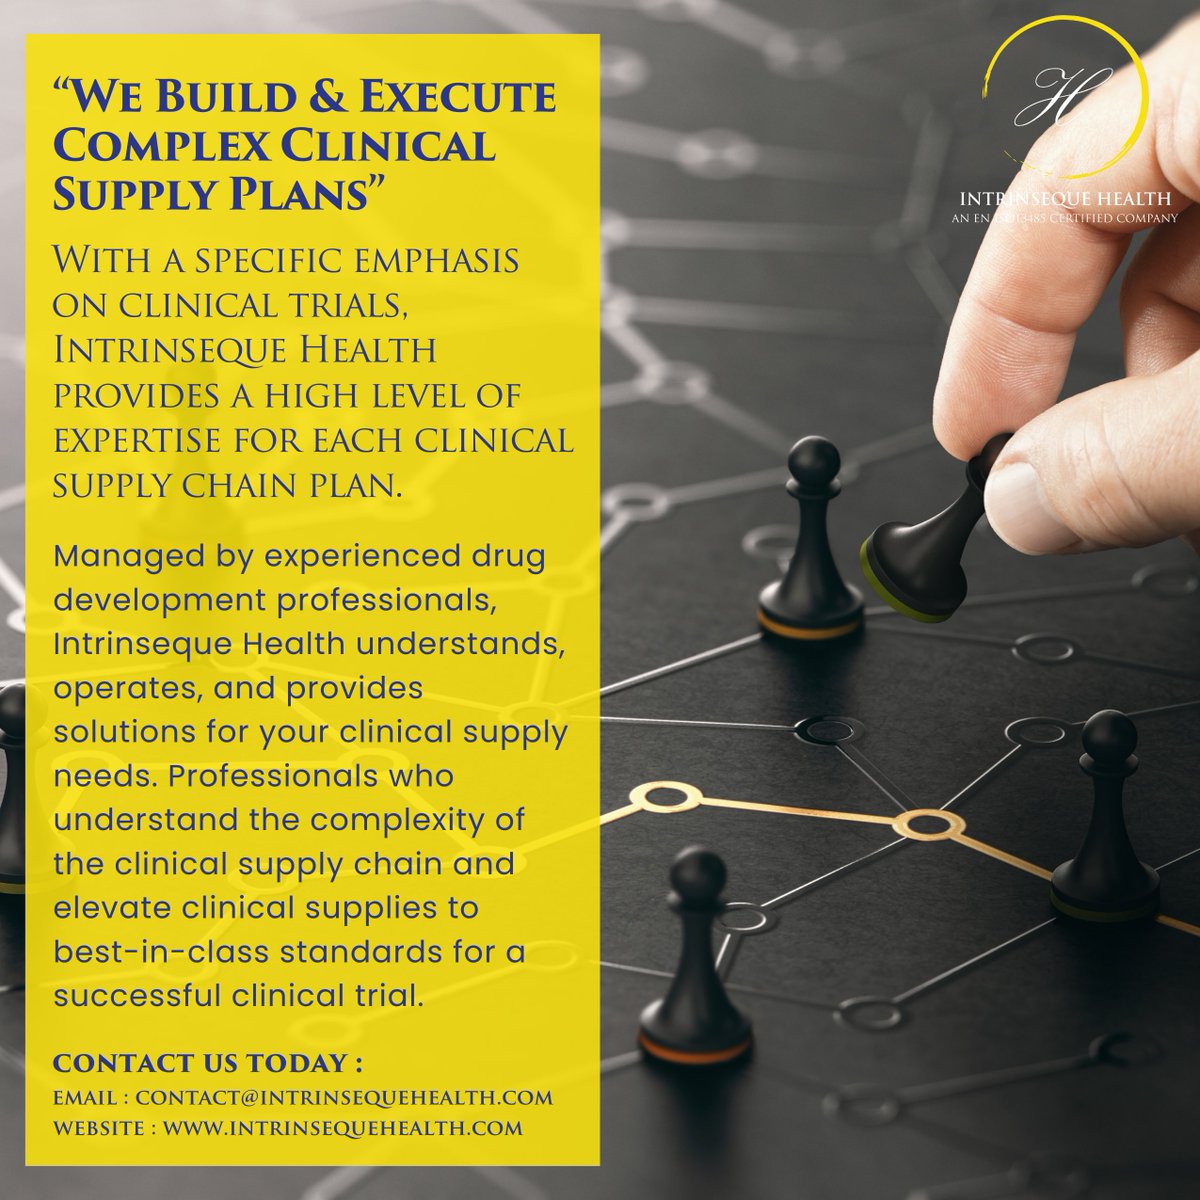 “We Build & Execute Complex Clinical Supply Plans”

With a specific emphasis on clinical trials, Intrinseque Health provides a high level of expertise for each clinical supply chain plan.

#drugdiscovery #drugdevelopment #studystartup #clinicaltrials #healthcare #clinicalresearch